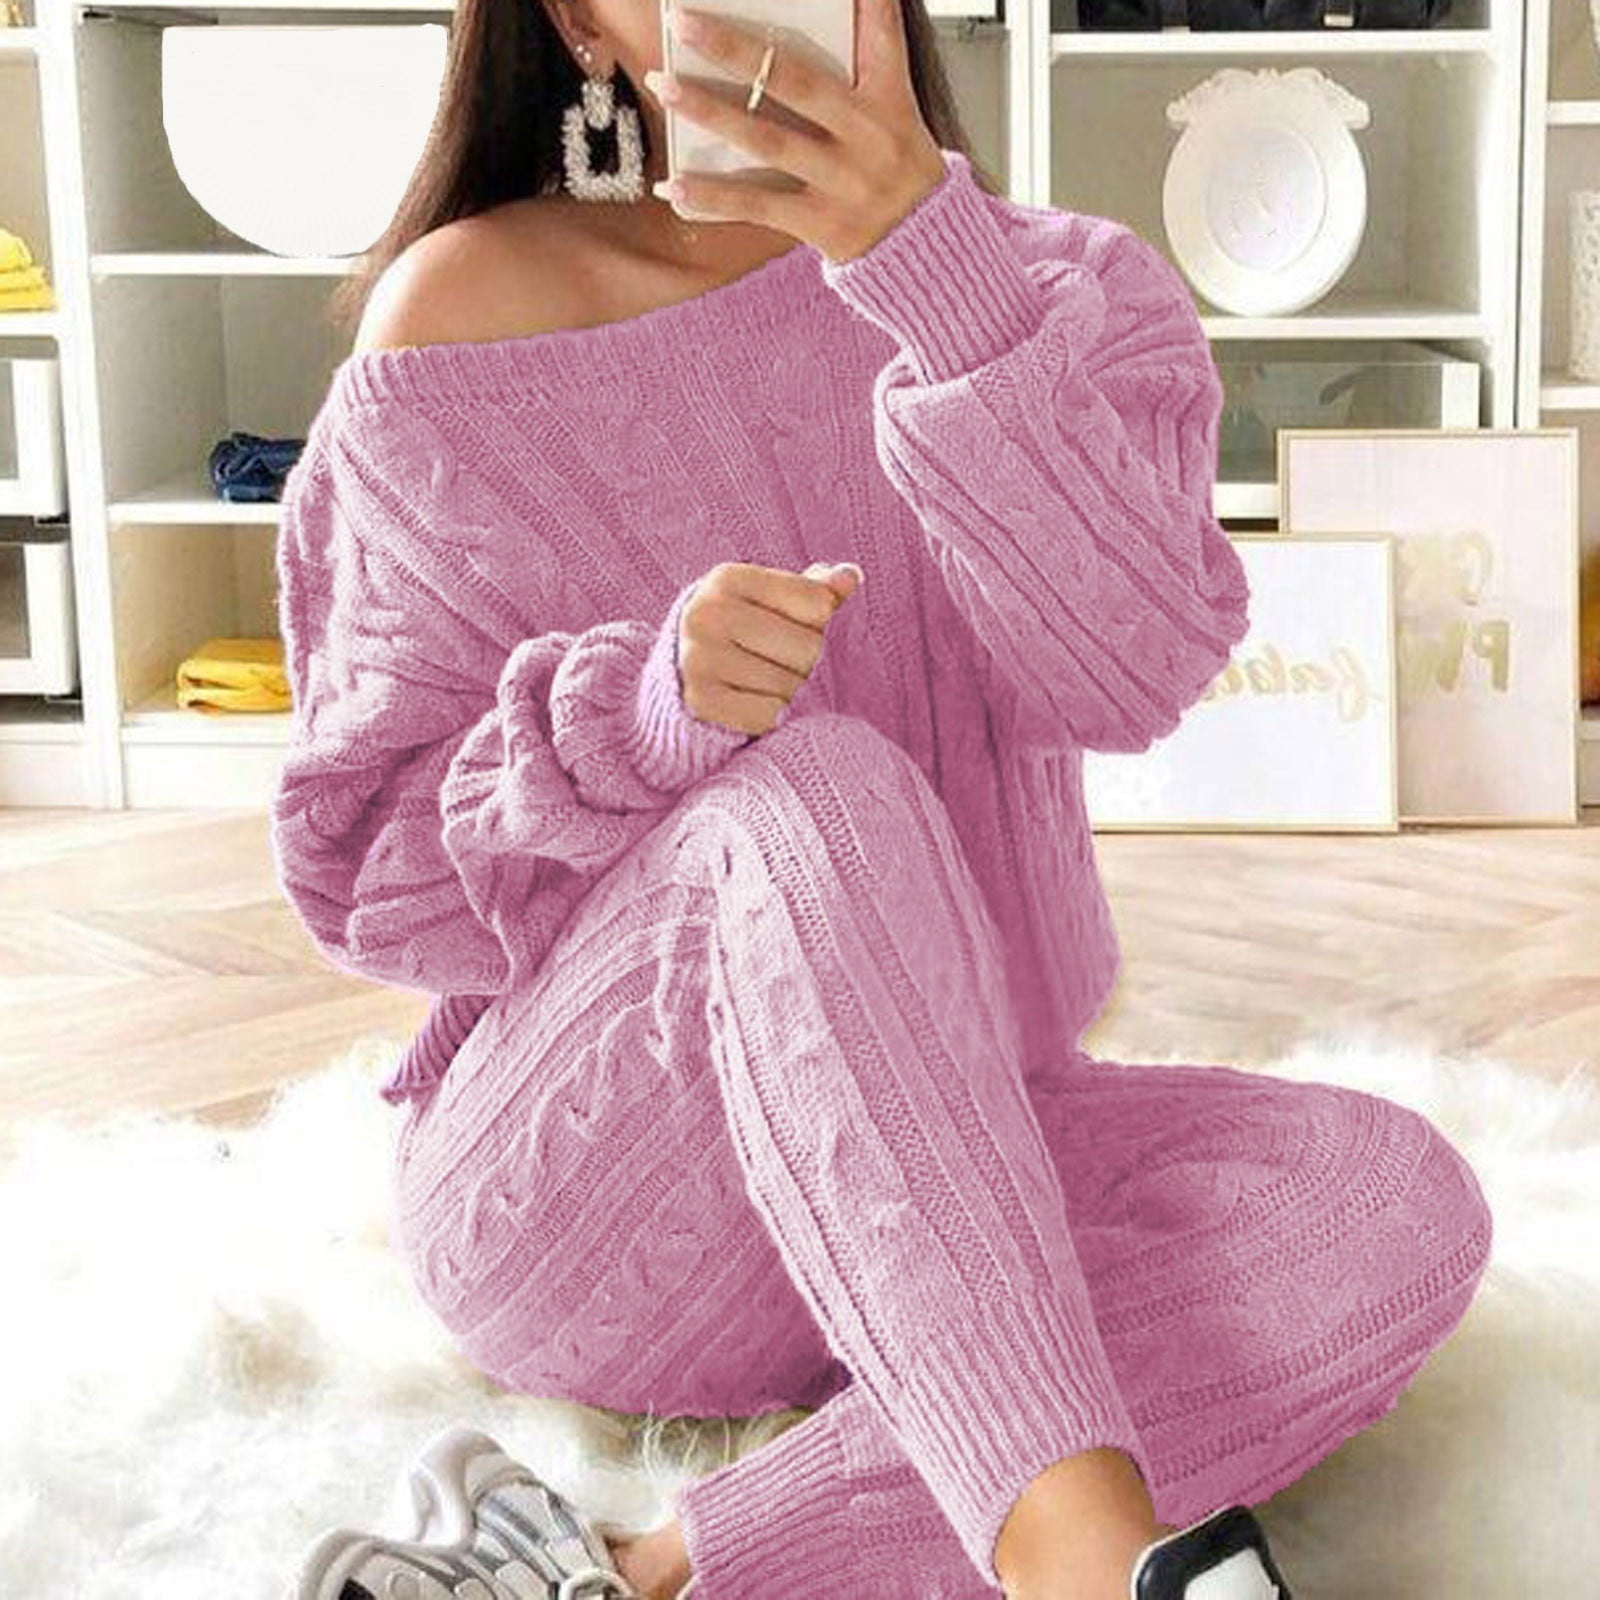 Homewear women soft 2 piece set autumn winter solid o neck pullover tops  knitted pants elegant lady pajama home suit